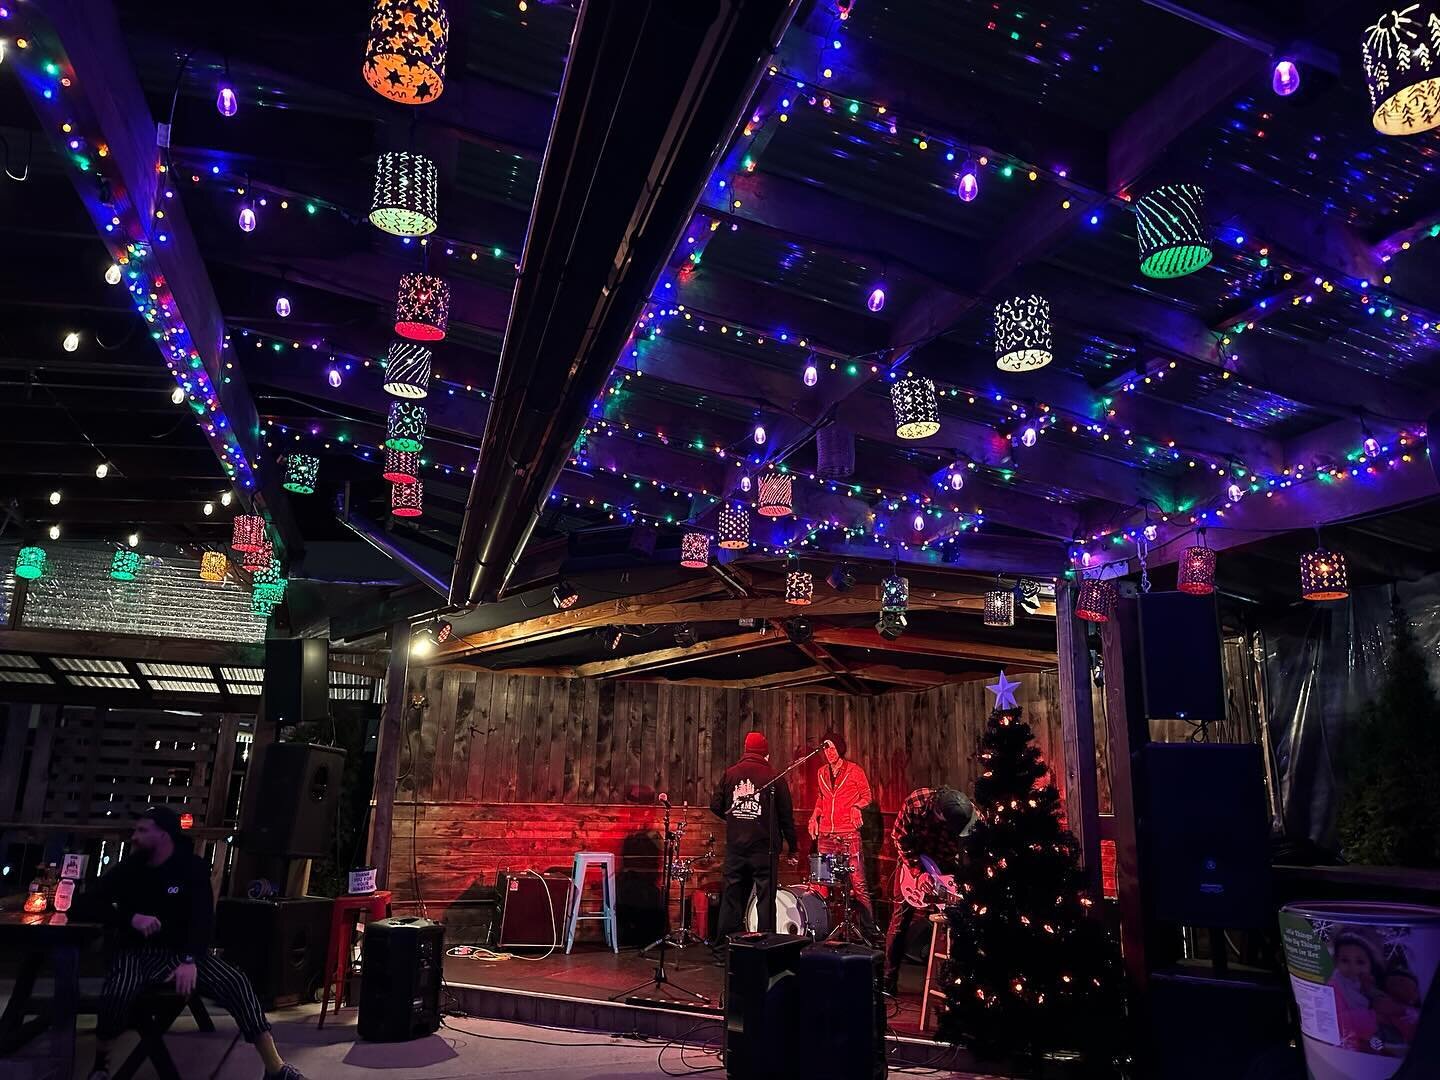 This place is f-ing awesome.  @timstavernseattle 8Pm kickoff.  Purusa acoustic at 10.  Rain on the metal roof, hot toddies in the airstream, heaters on, rock and roll.  #fridaynight #seattle #livemusic #timstavernseattle #getout